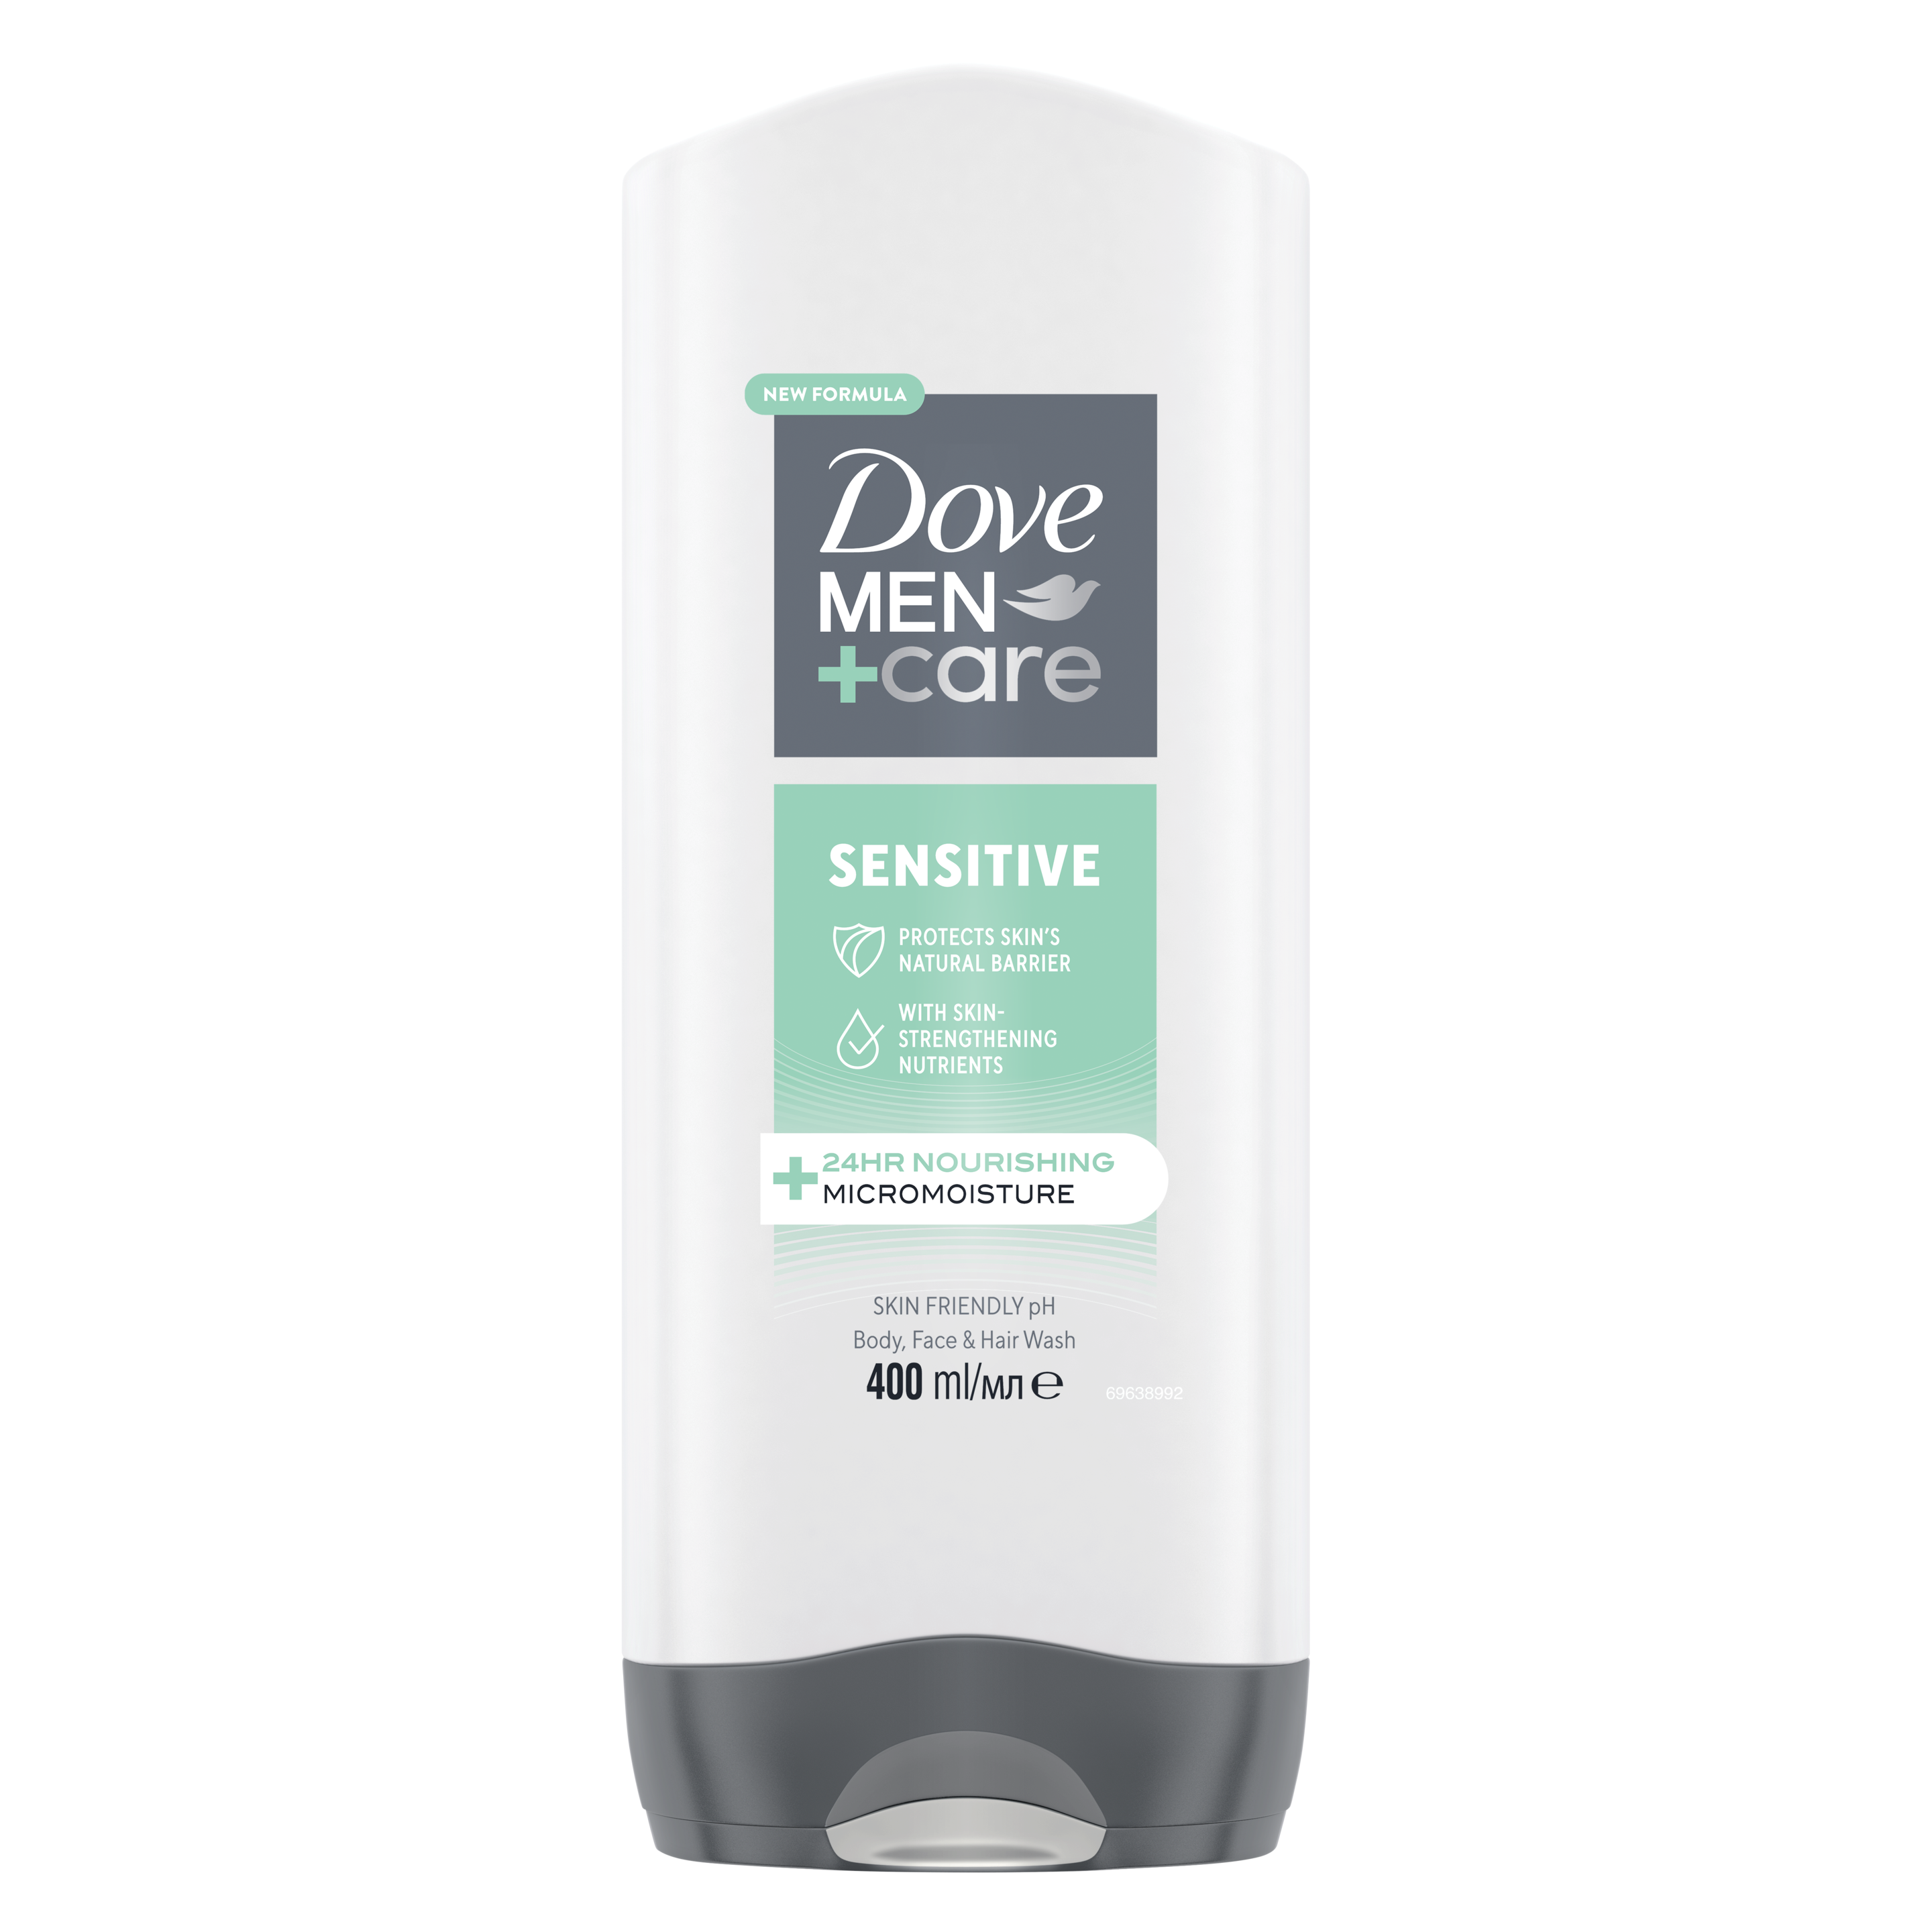 Dove Men+Care Sensitive 3-in-1 Body, Face and Hair Wash